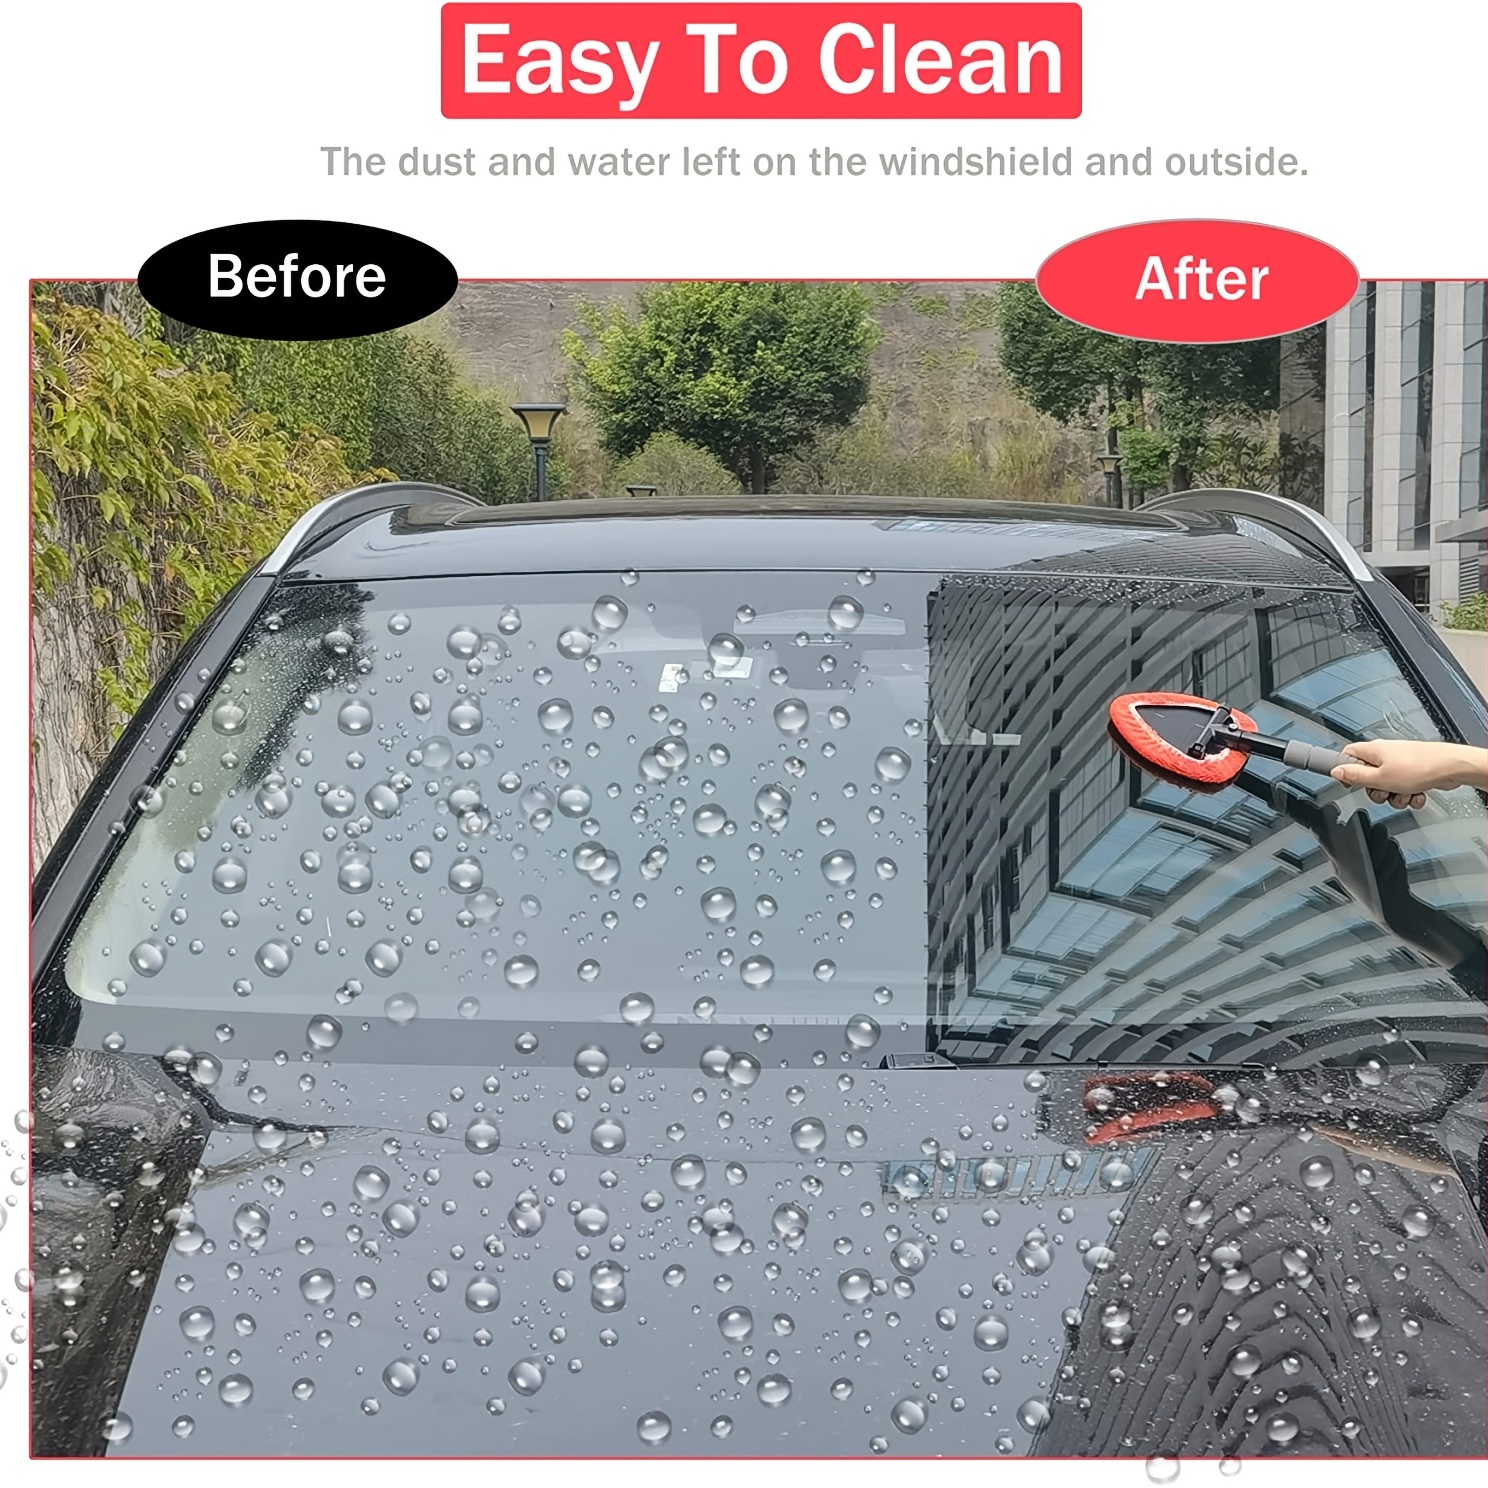 Windshield Cleaning Tool On On White Stock Photo 328166543